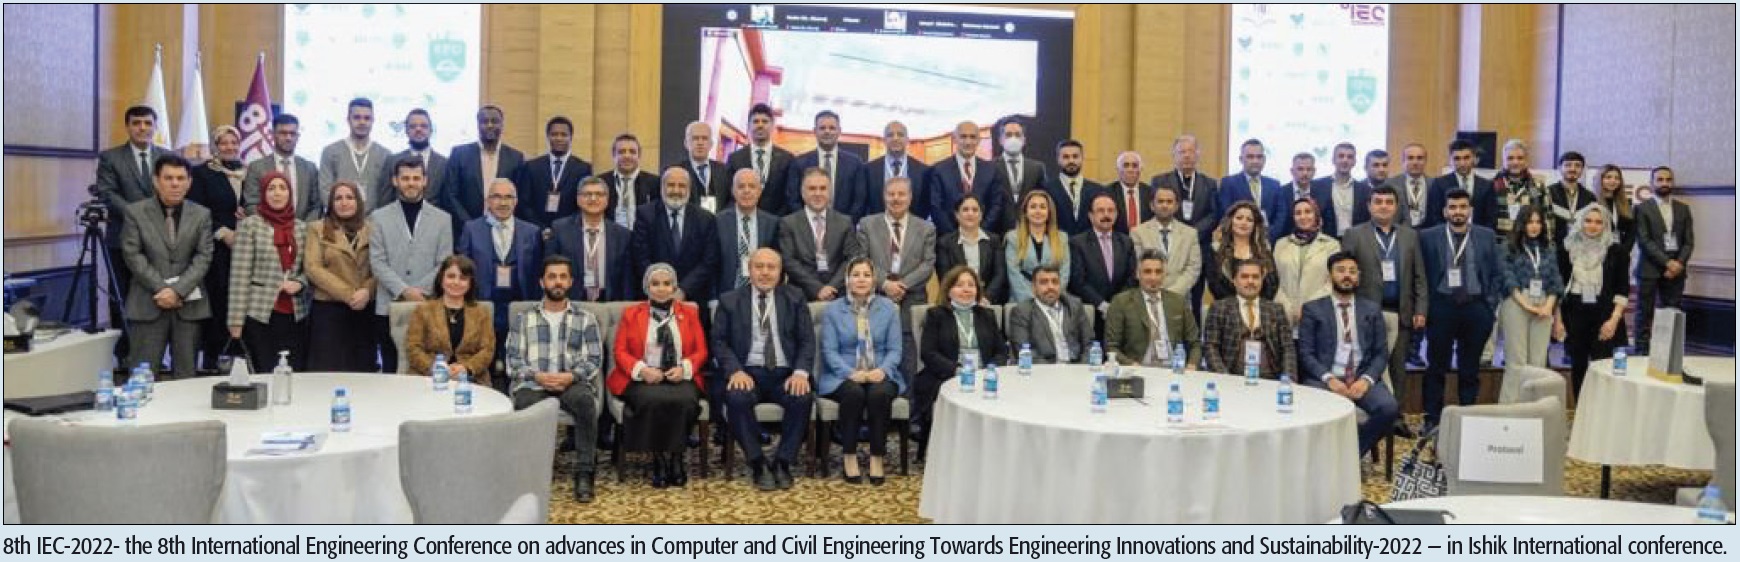 8th IEC-2022- the 8th International Engineering Conference on advances in Computer and Civil Engineering Towards Engineering Innovations and Sustainability-2022 — in Ishik International conference.